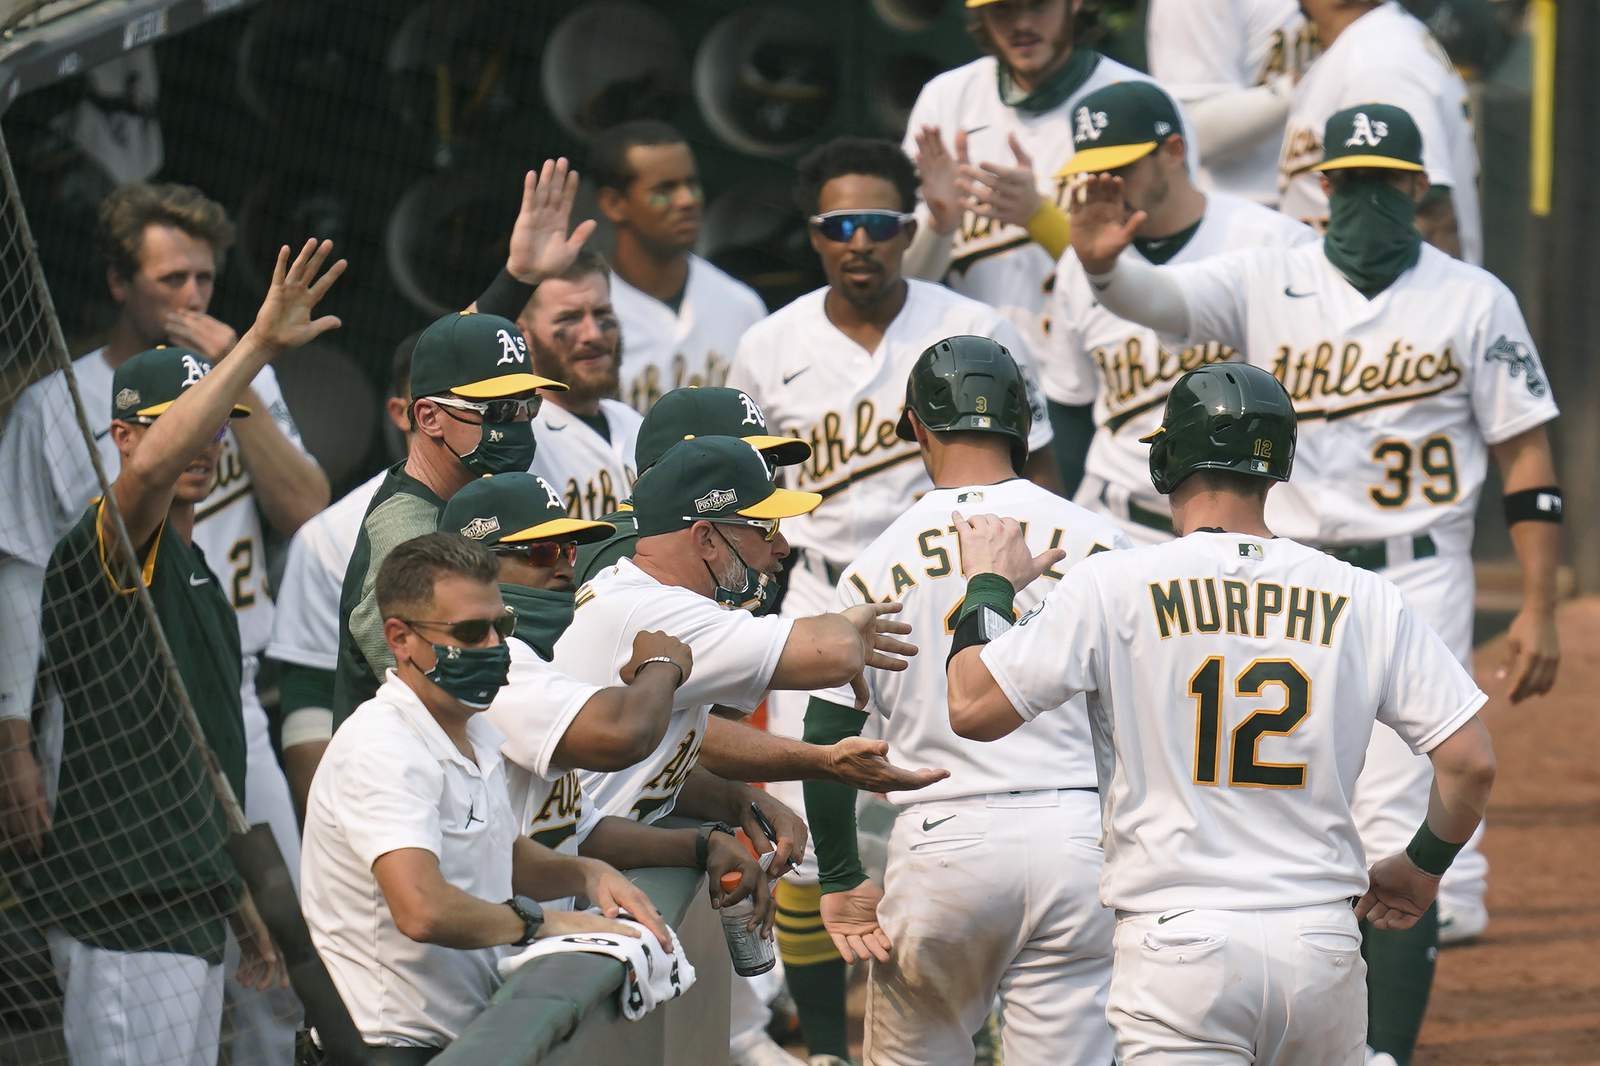 Pinder delivers timely hit, A's advance in playoffs at last